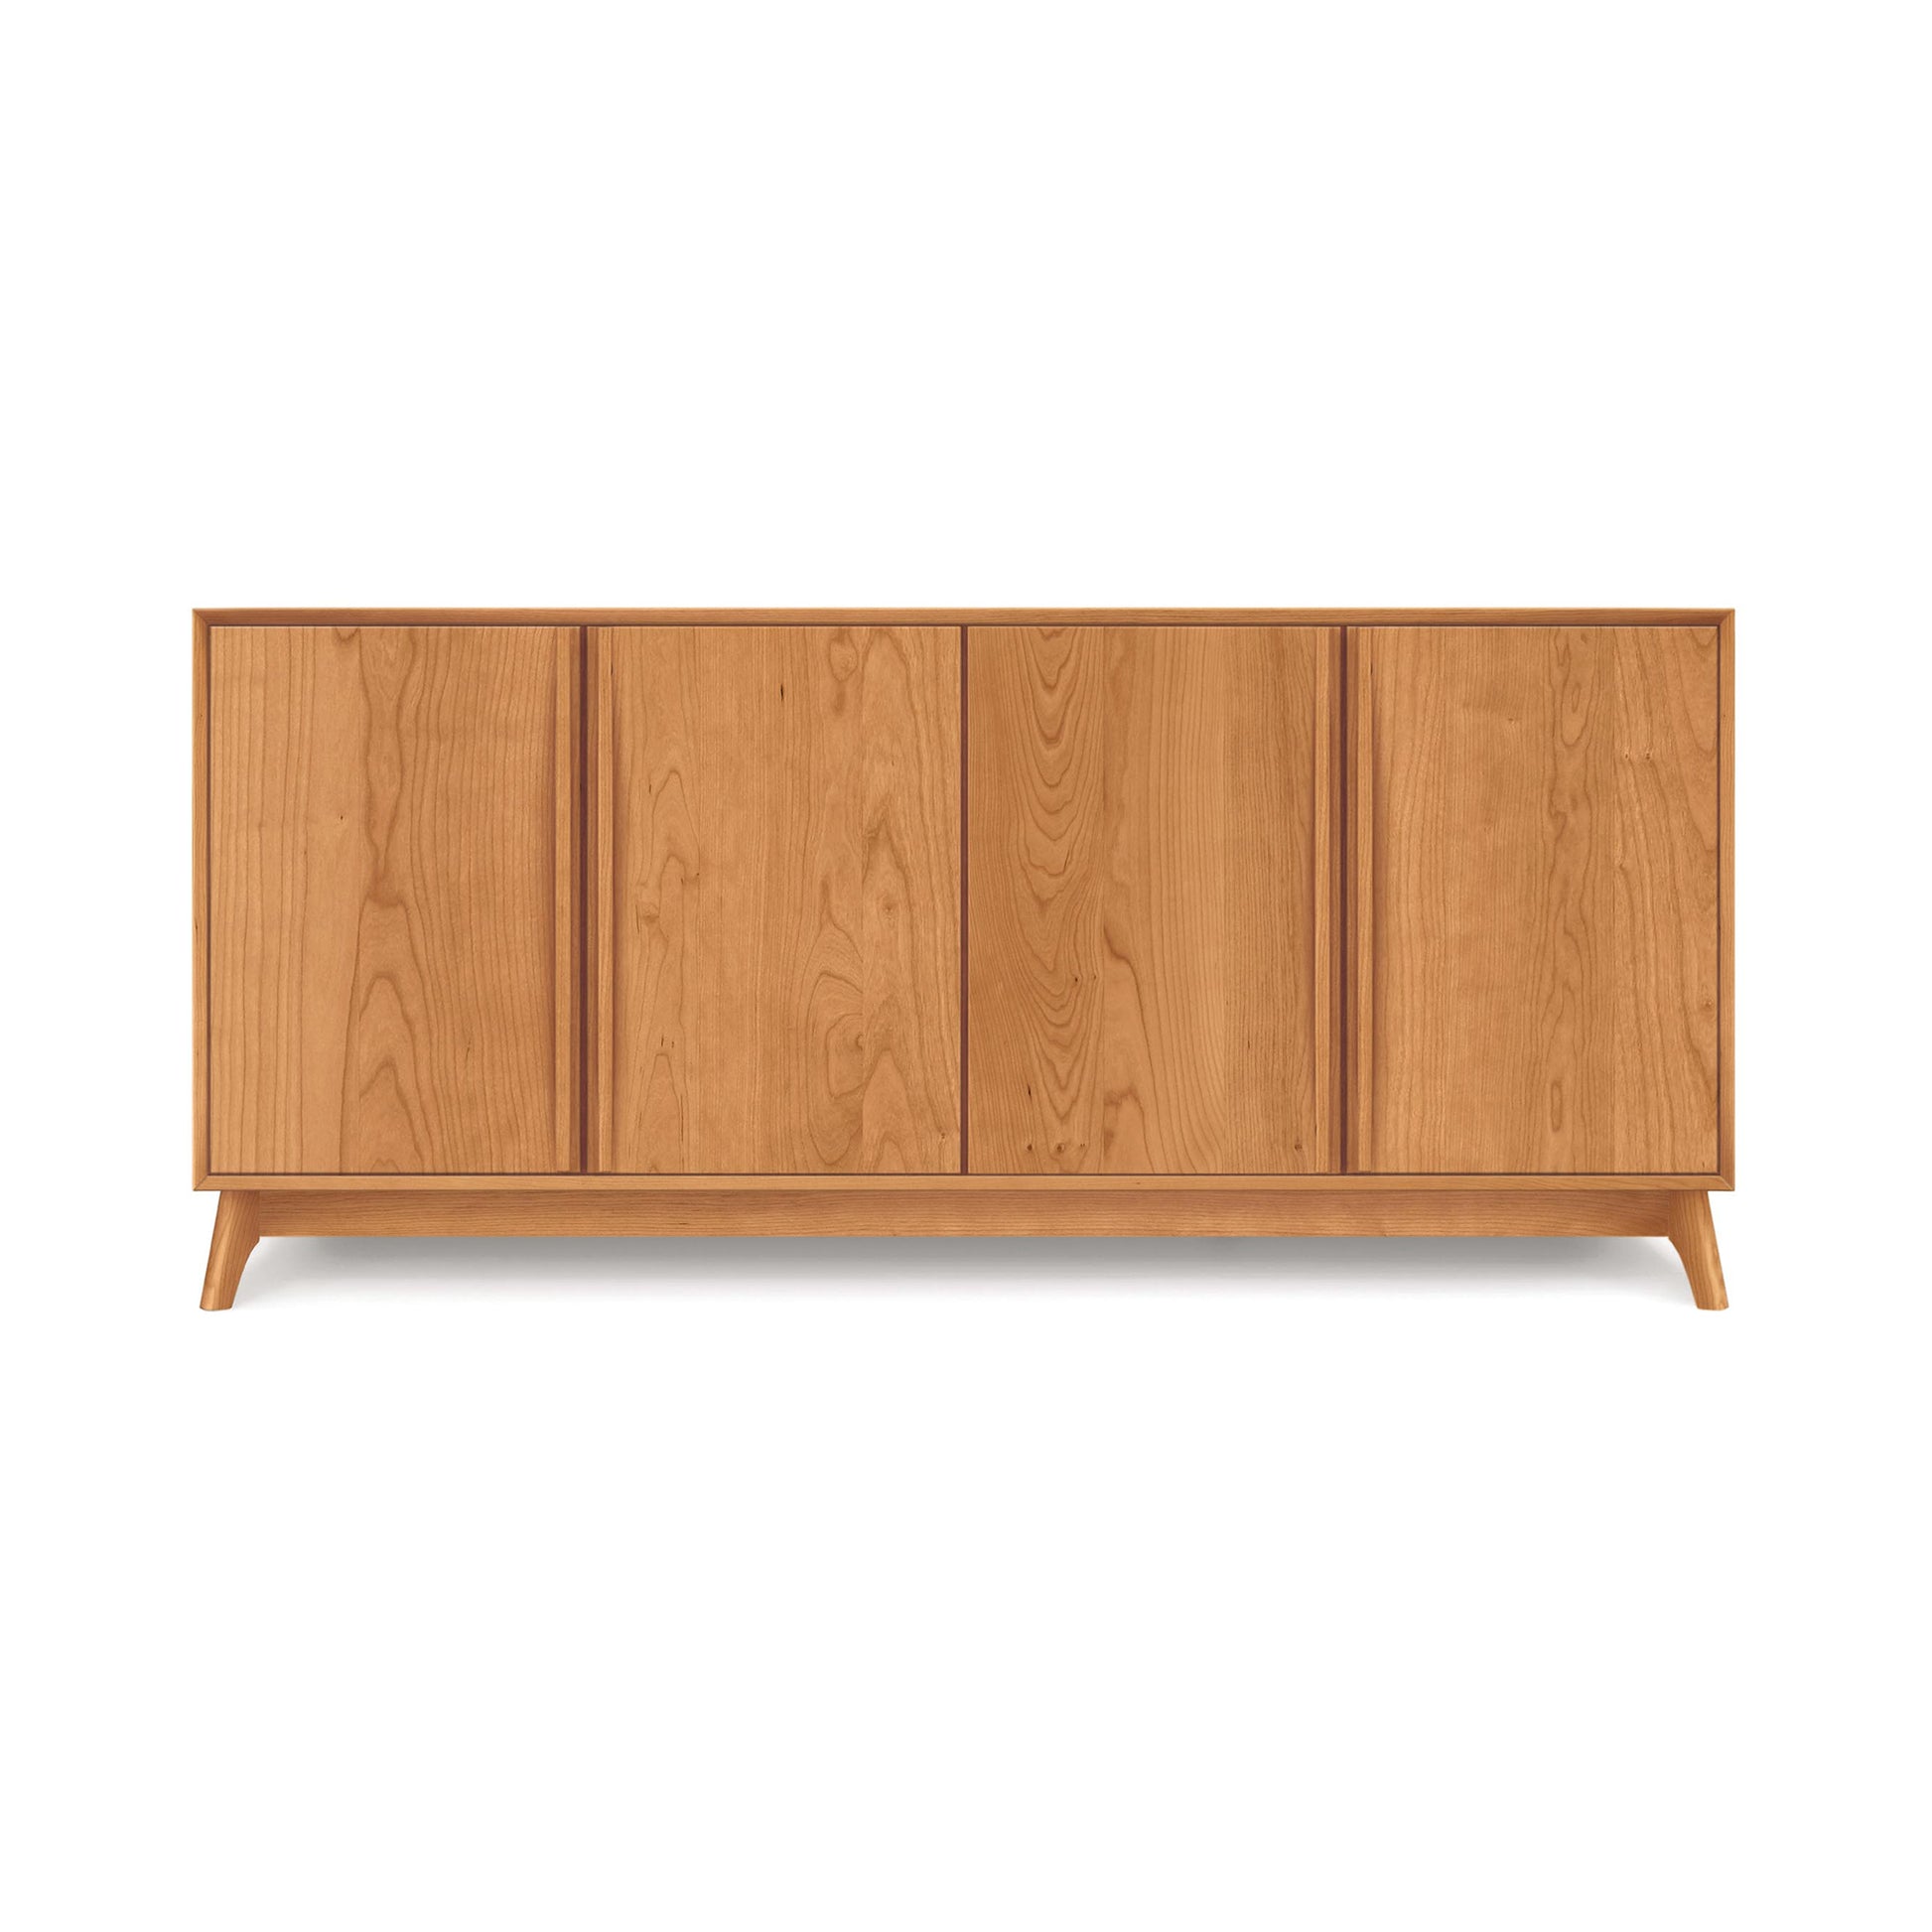 A mid-century modern Catalina 4-Door Buffet with angled legs, isolated on a white background by Copeland Furniture.